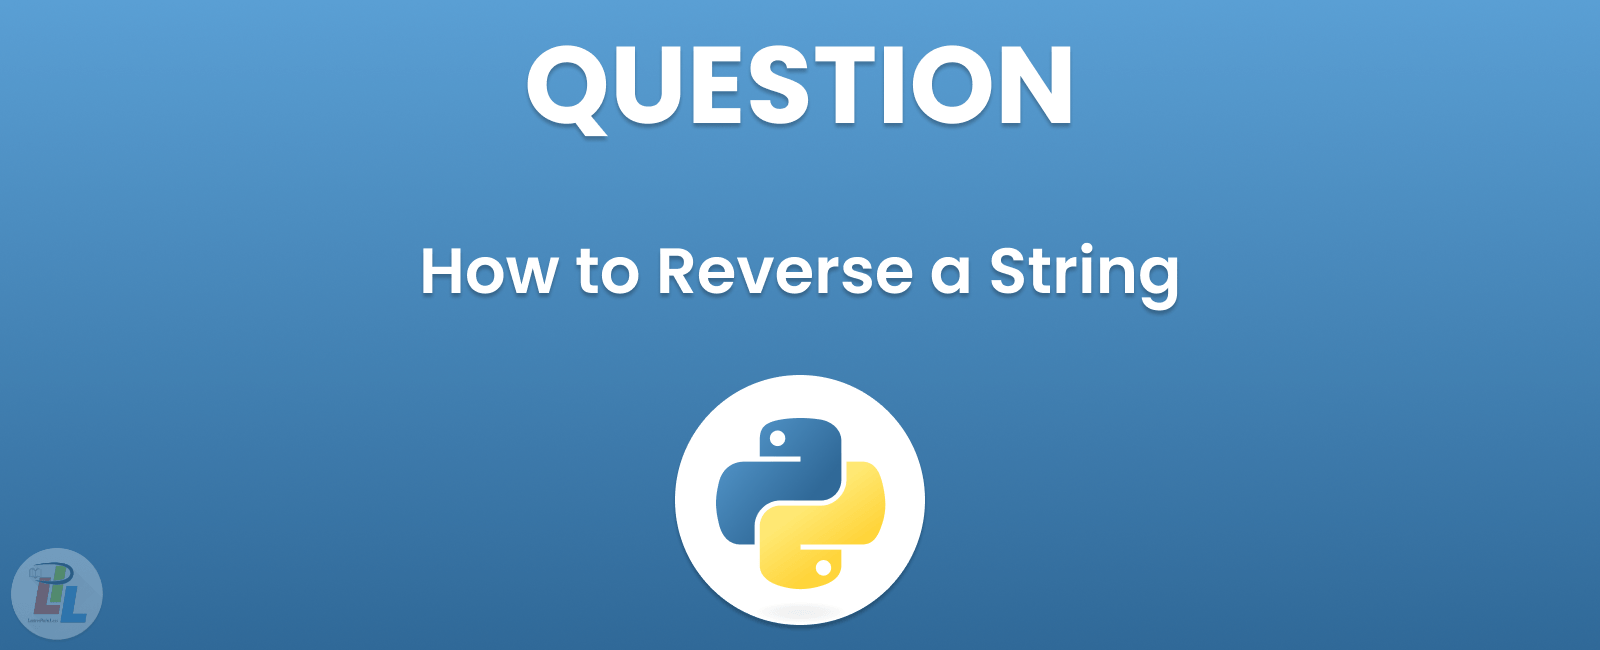 How to Reverse a String in Python: 3 ways to do